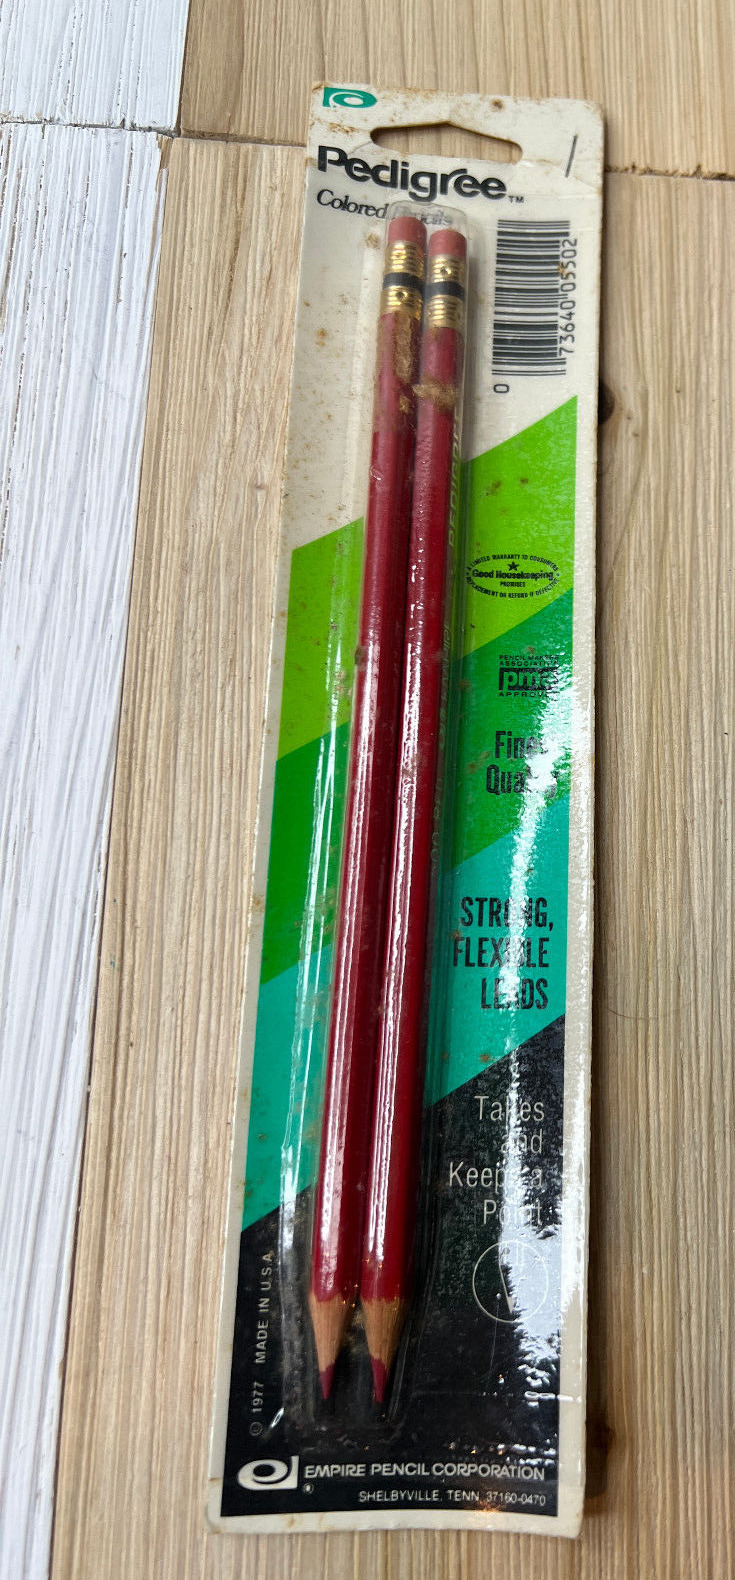 Vintage Pedigree Colored Pencils 1977 USA 000Red Finest Quality 70s NEW